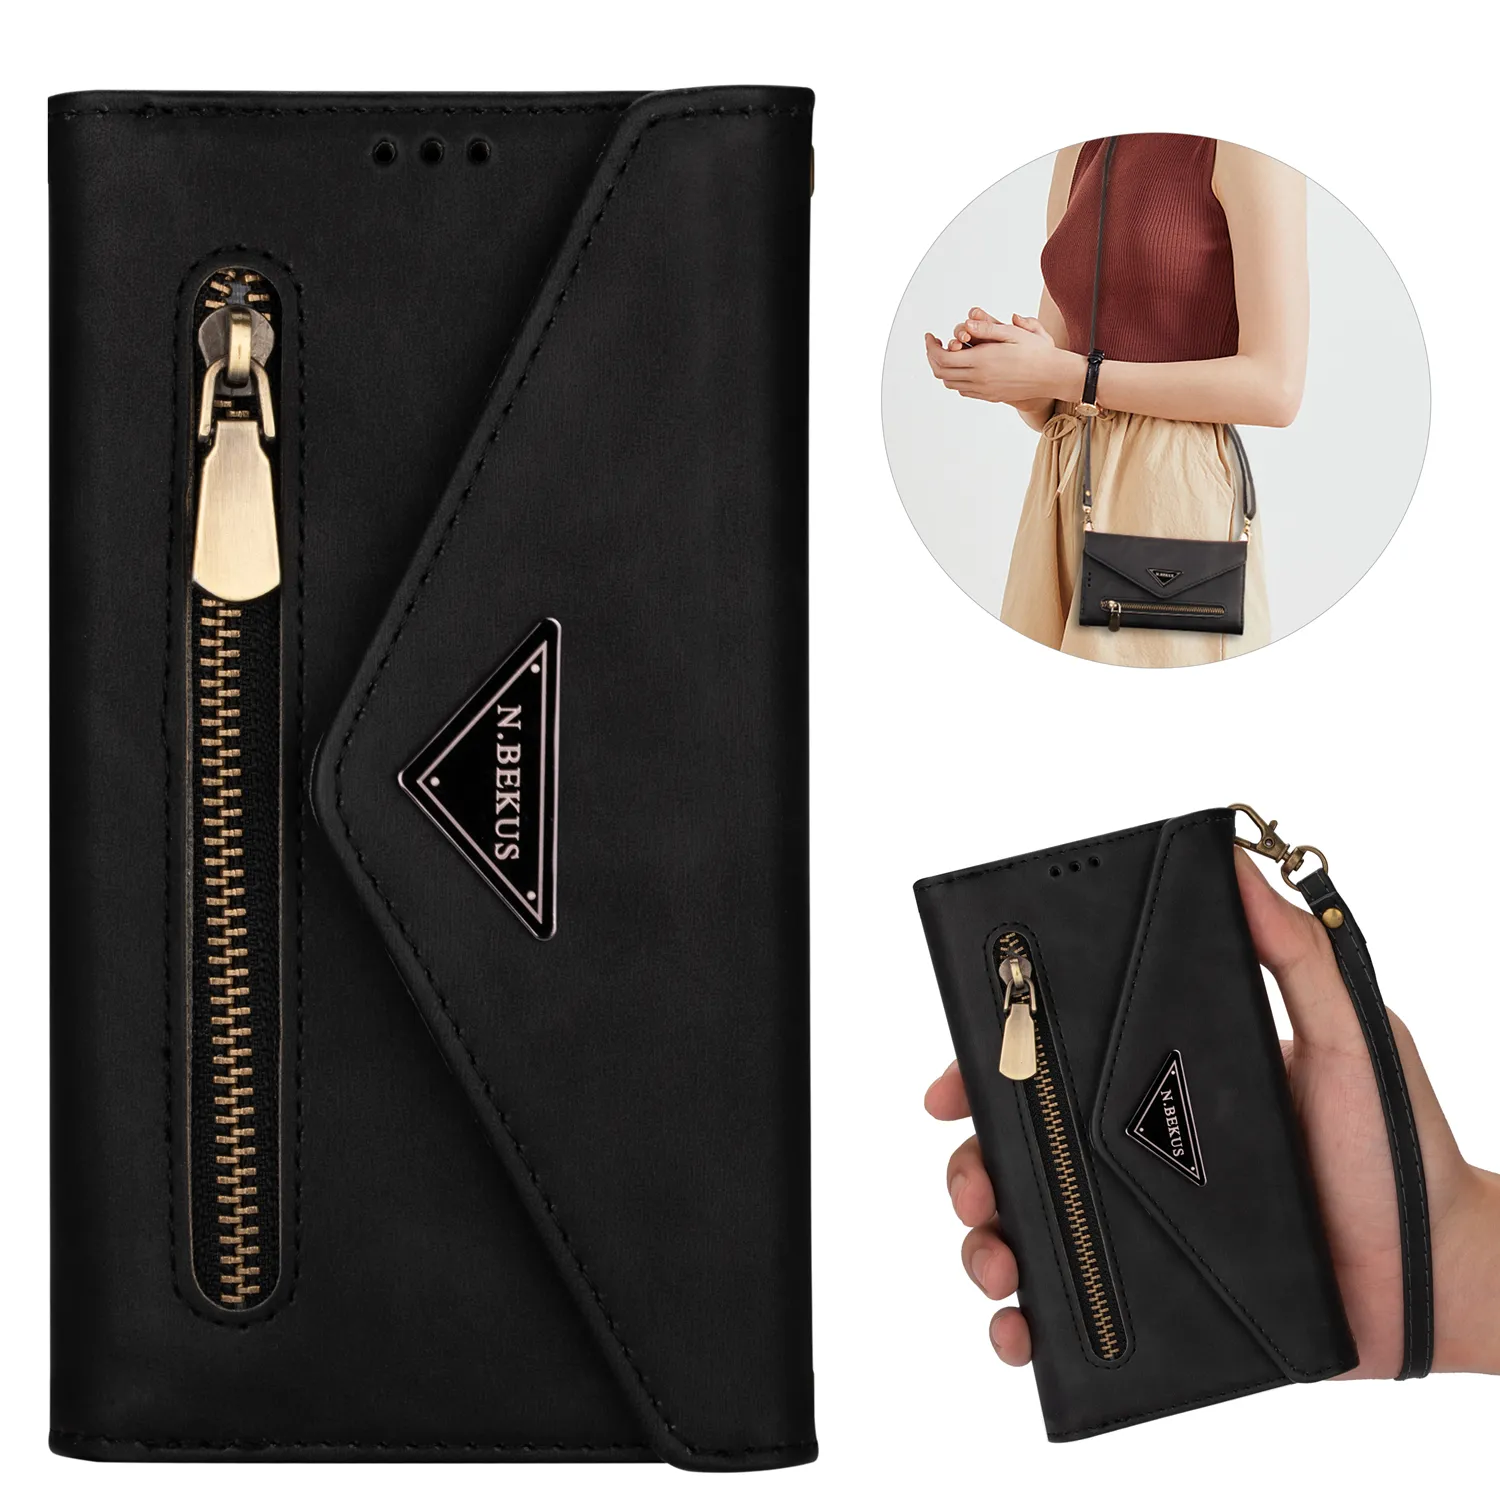 Luxury Lades Phone wallet Cover For Samsung S20FE S21FE A82 A81 A91 S10e Accessories Case Leather Flip For Samsung A82 A81